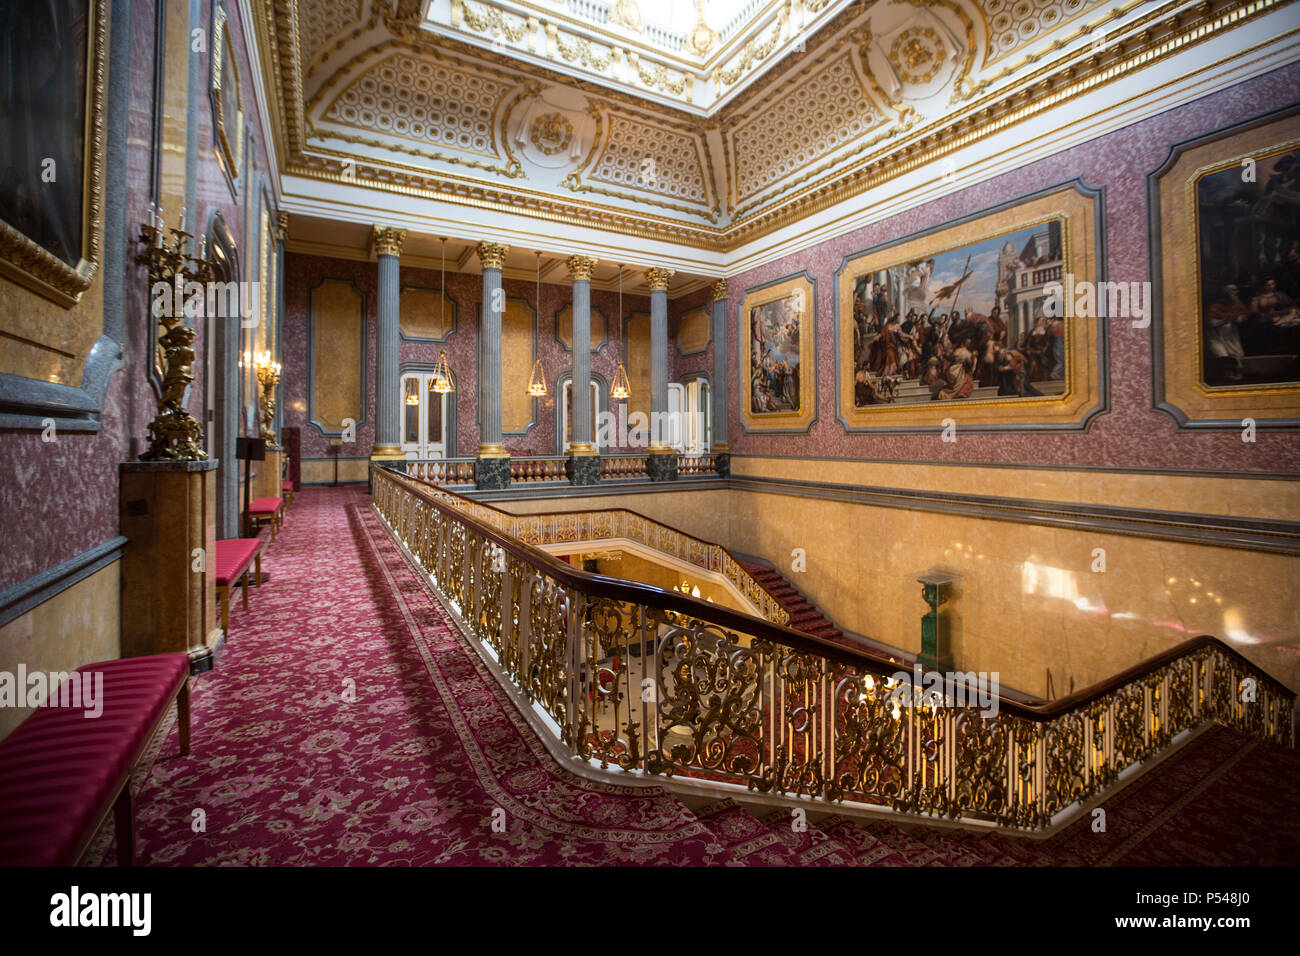 Interior photographs showing the Grand Hall and staircase of Lancaster House, managed and run by The United Kingdom Foreign & Commonwealth Office, UK Stock Photo